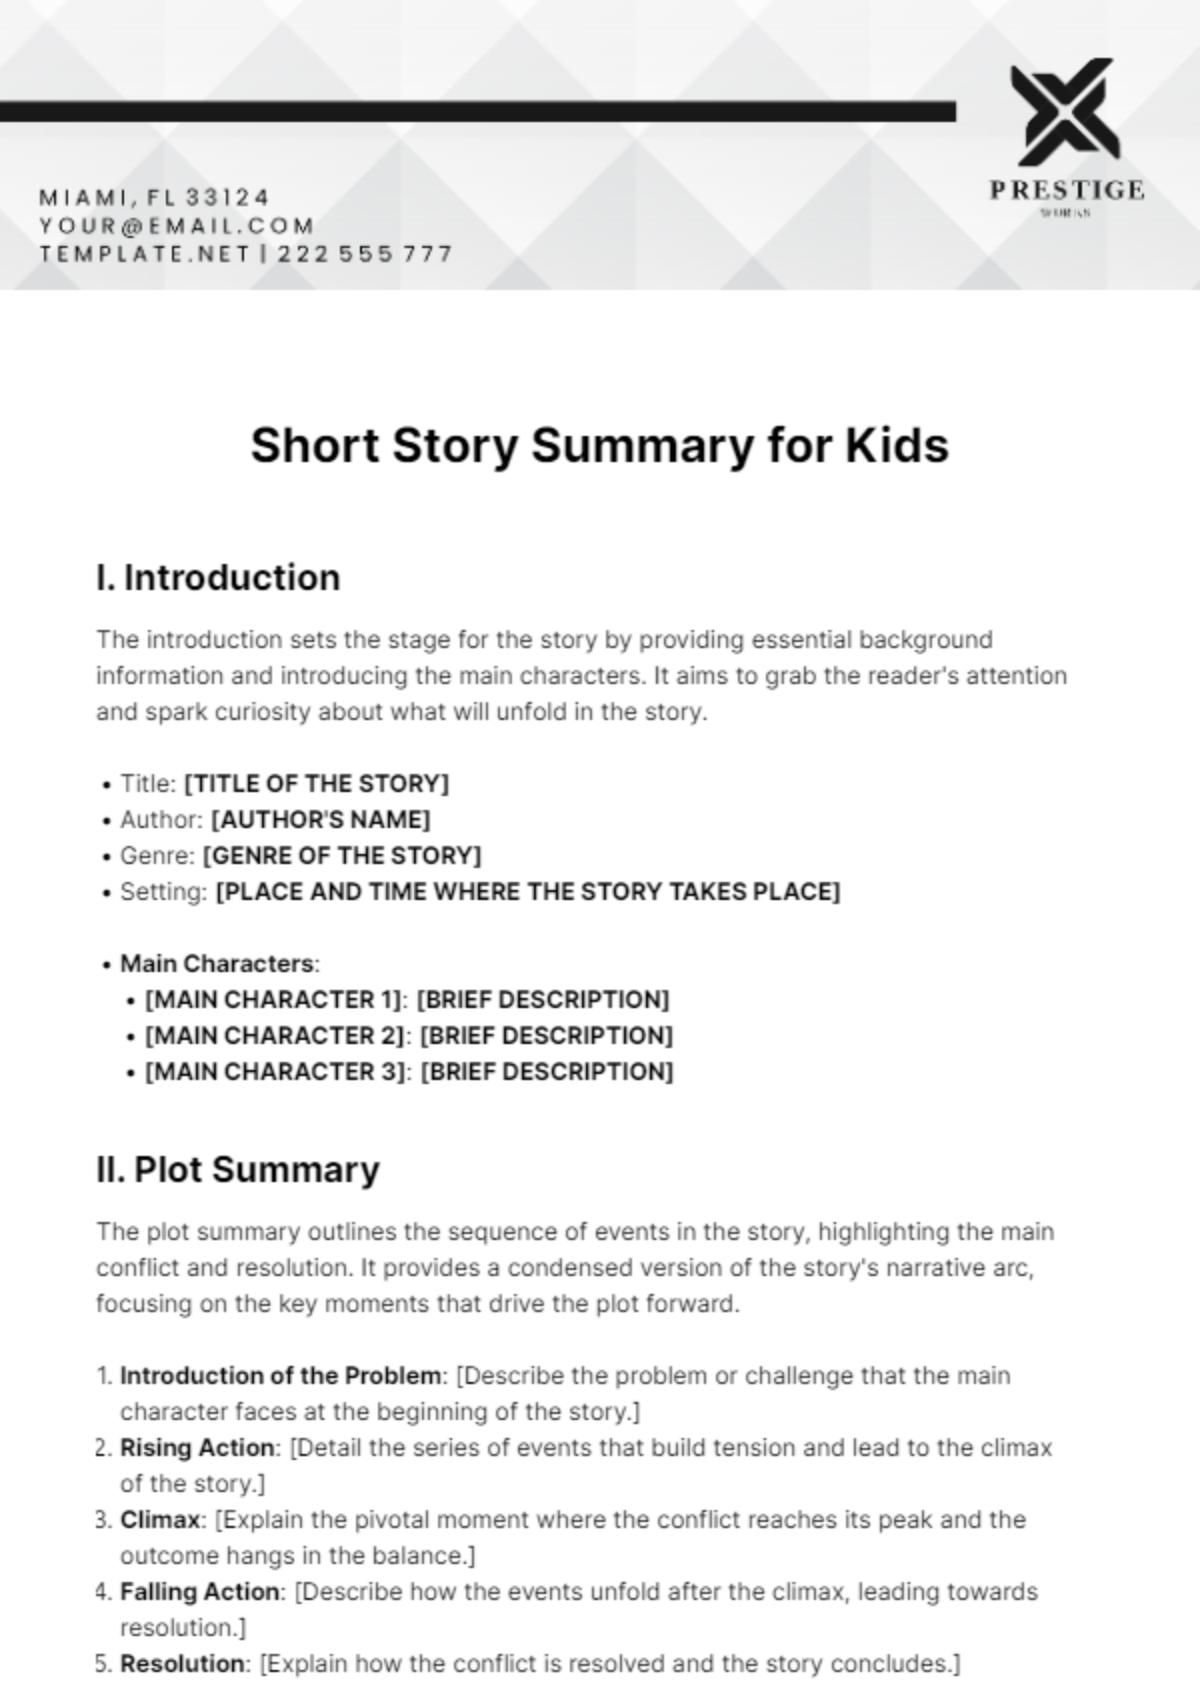 Free Short Story Summary for Kids Template